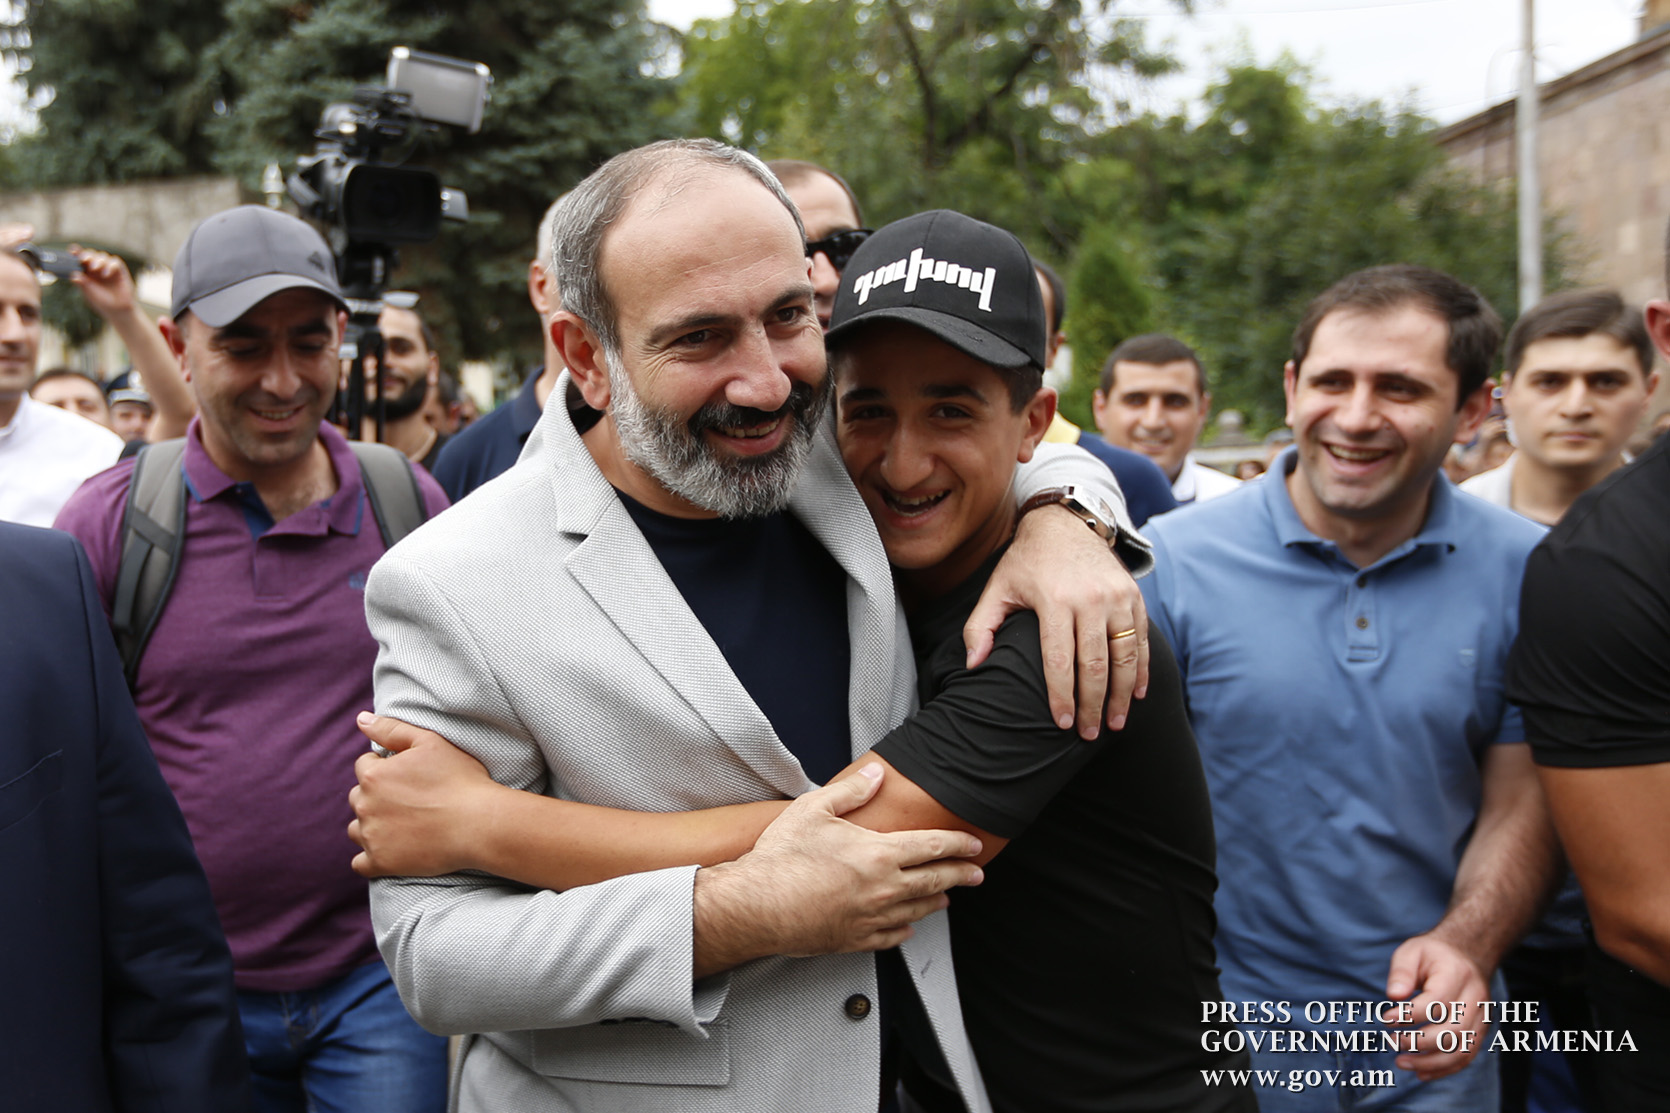 More people have come to Armenia than left it since May – PM meets with Tavush Marz residents